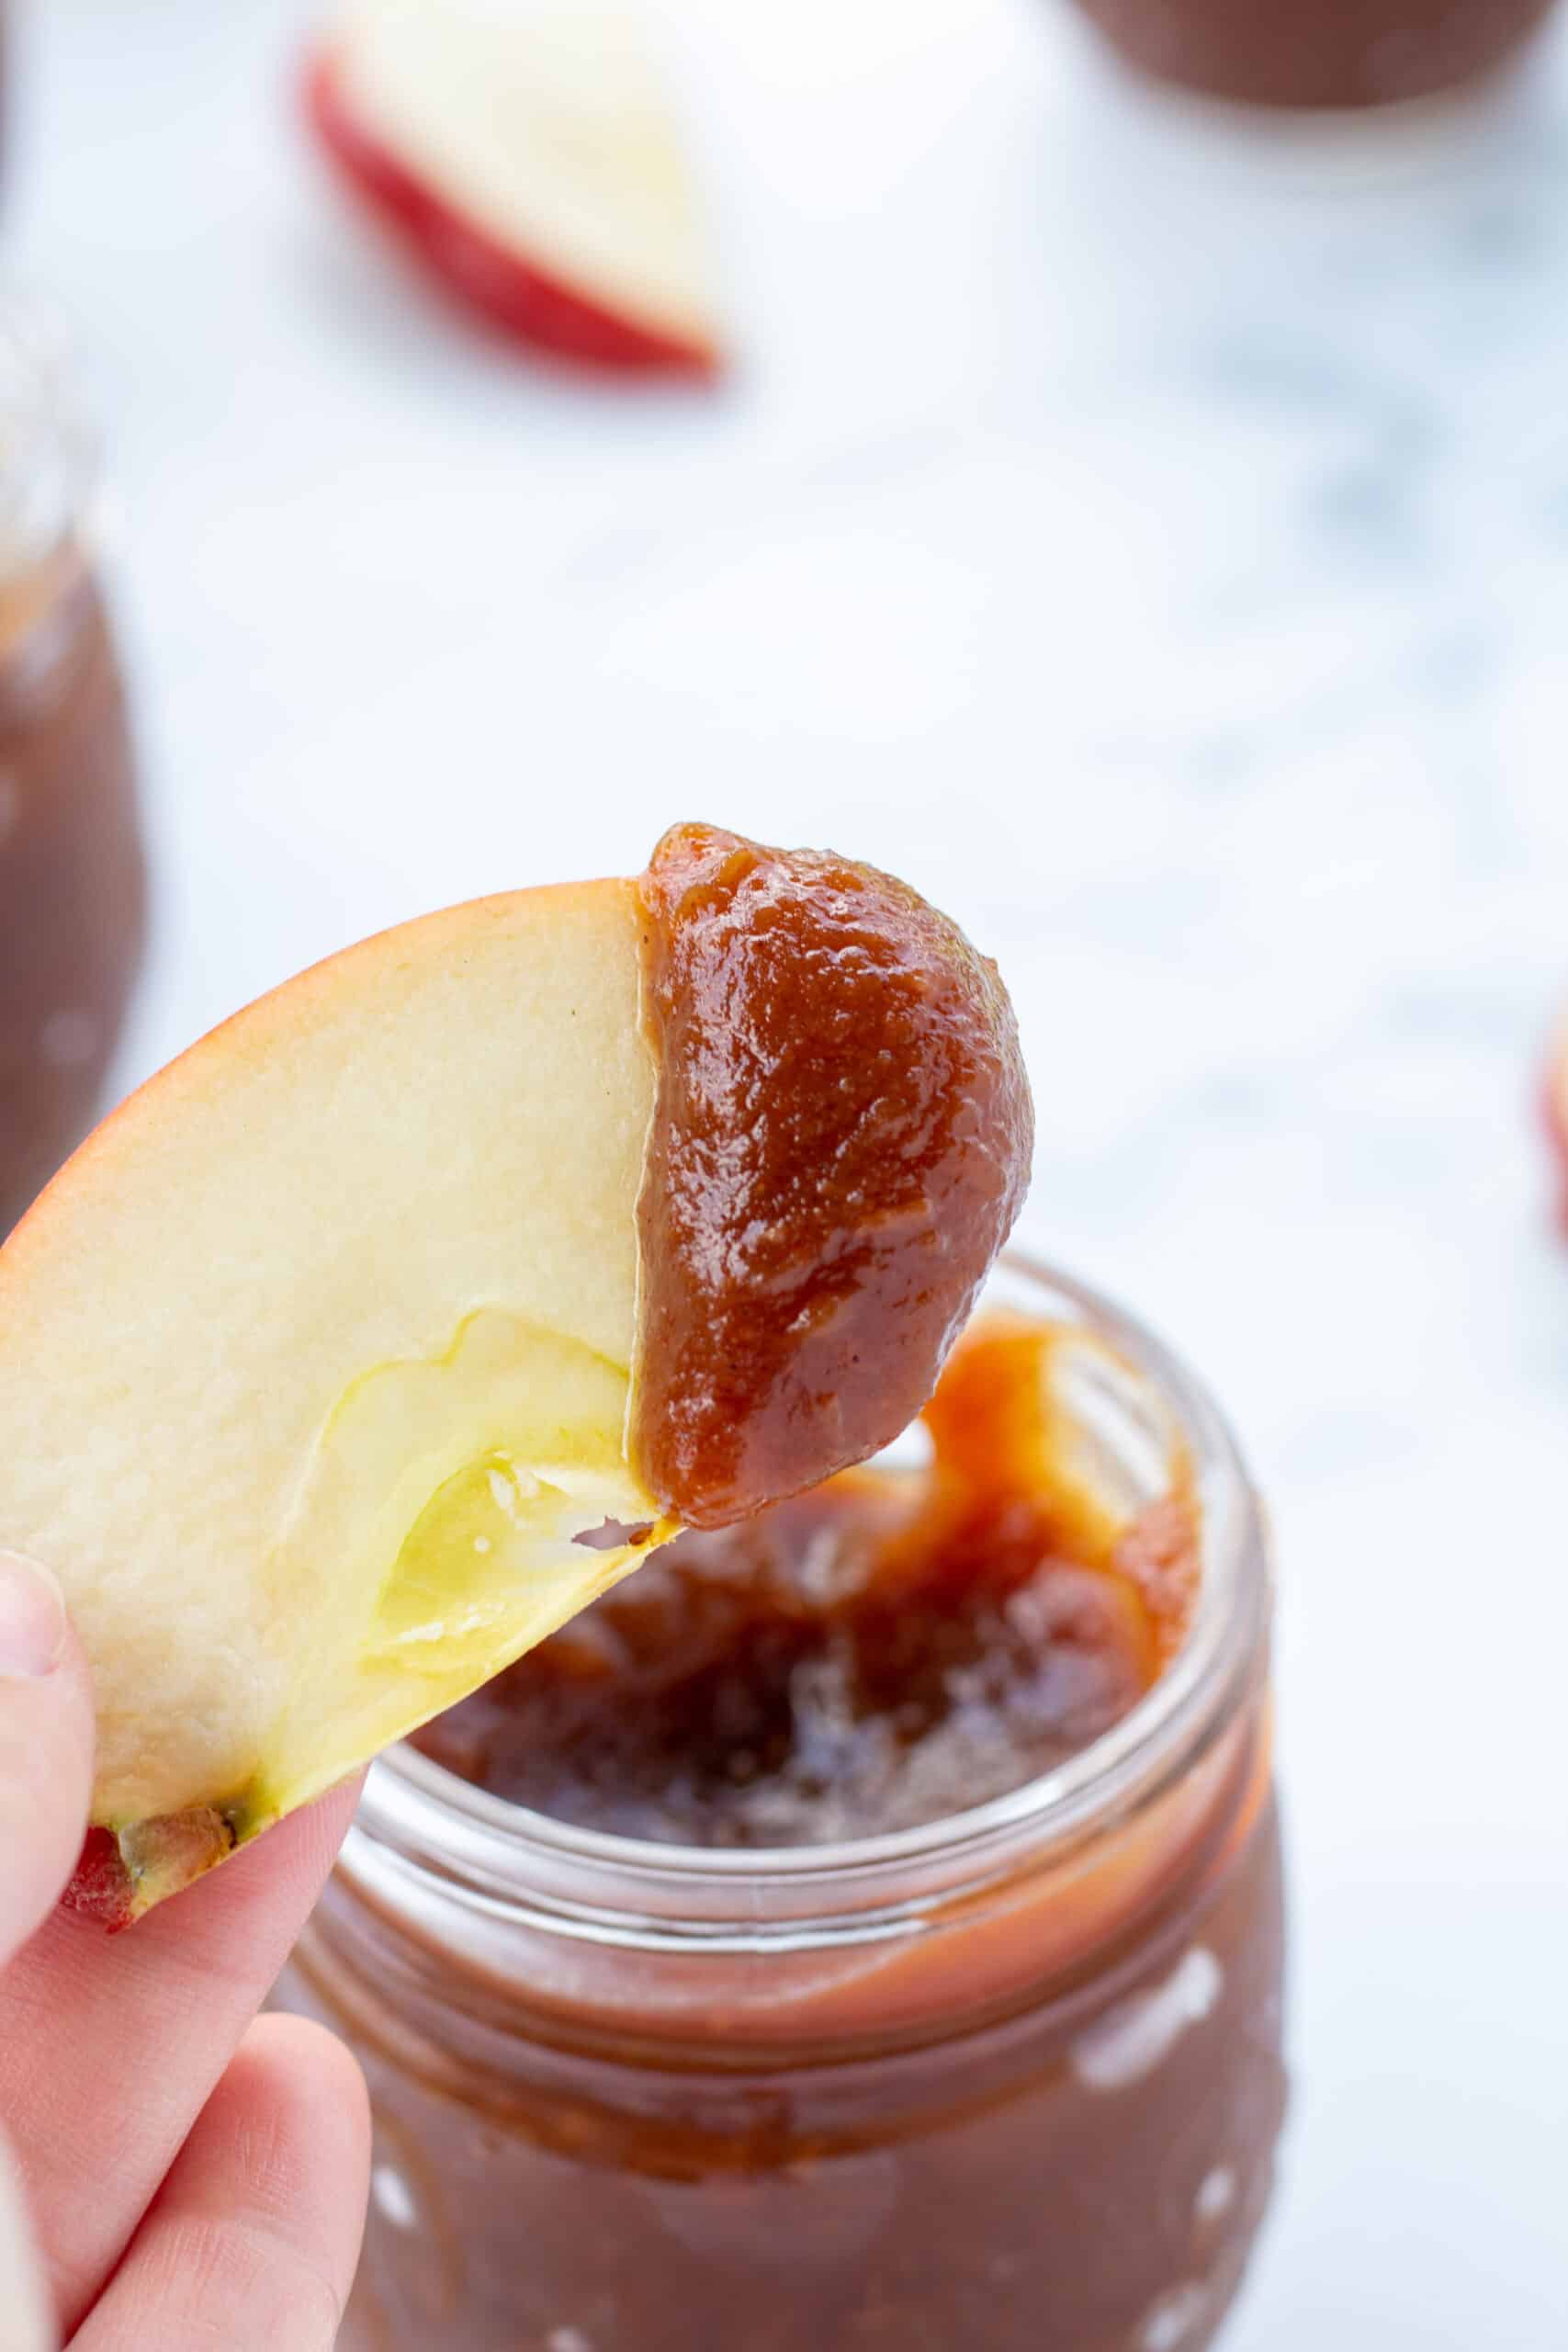 an apple slice dipped in homemade apple butter held by a hand over a glass jar of canned apple butter